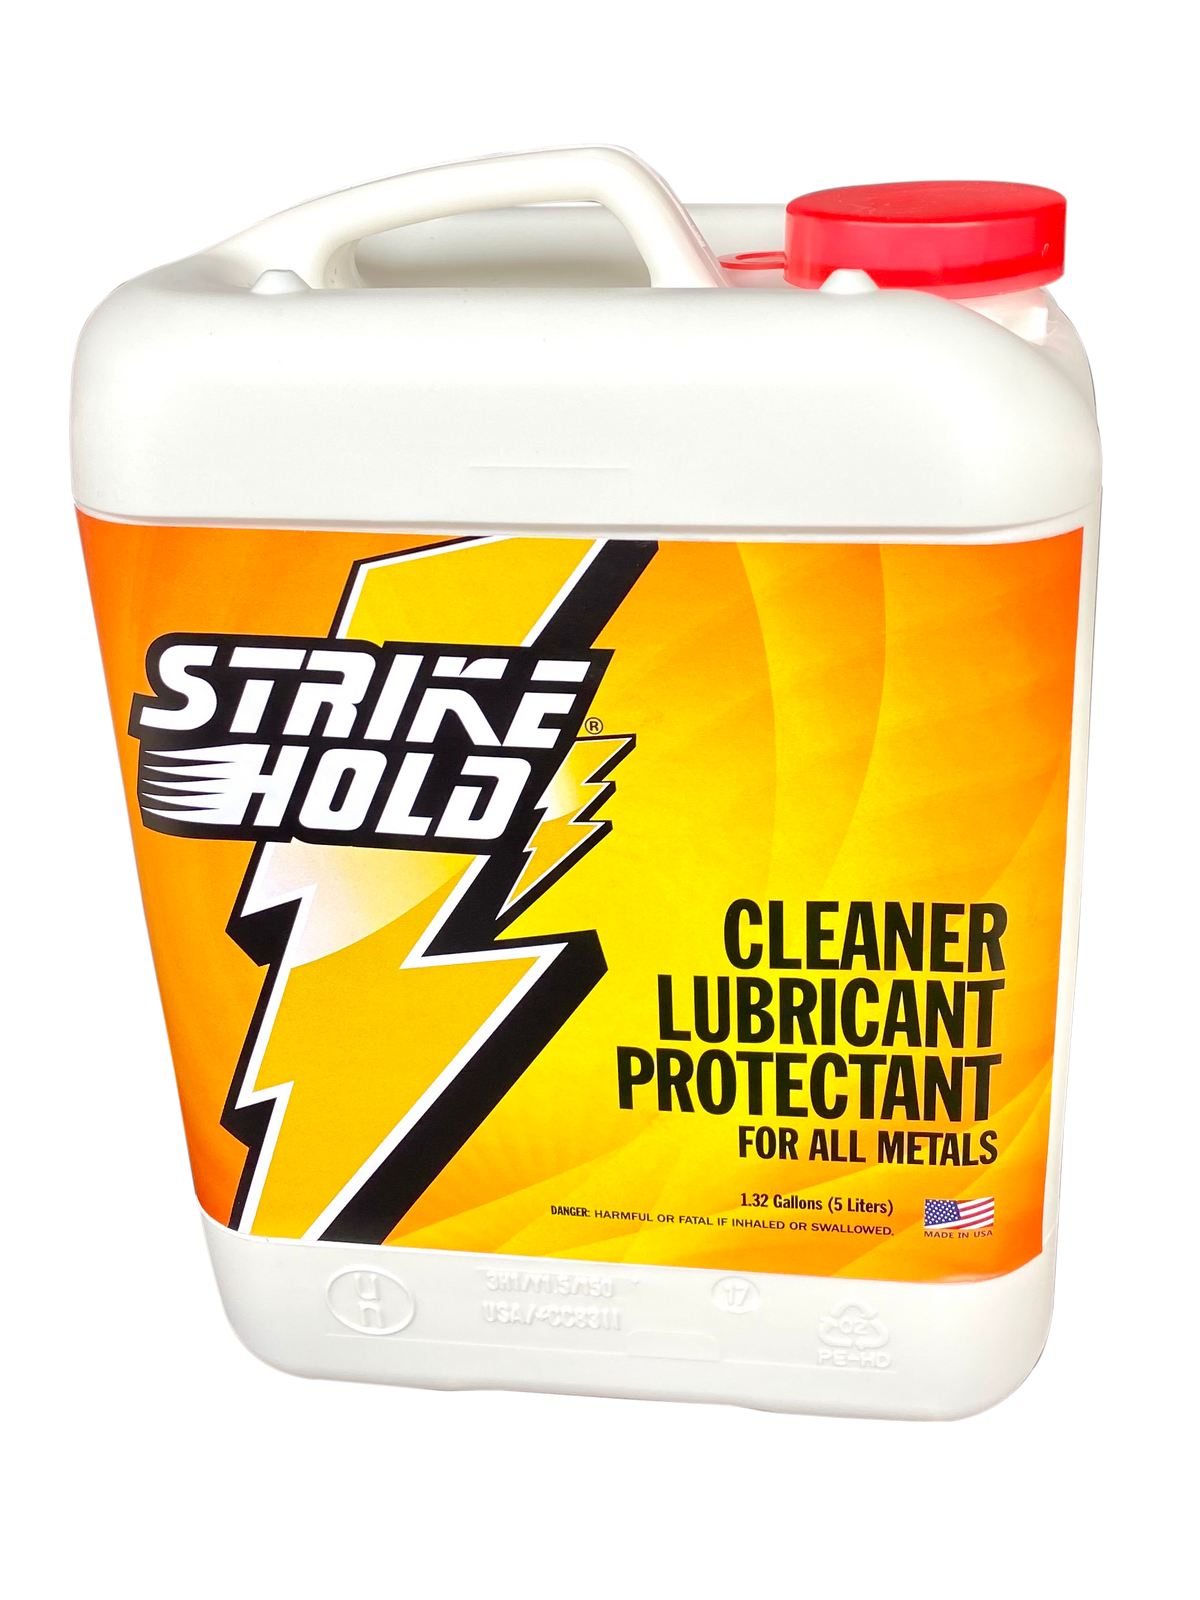 STRIKE HOLD: The BEST Cleaner, LUBRICANT, and PROTECTANT for your